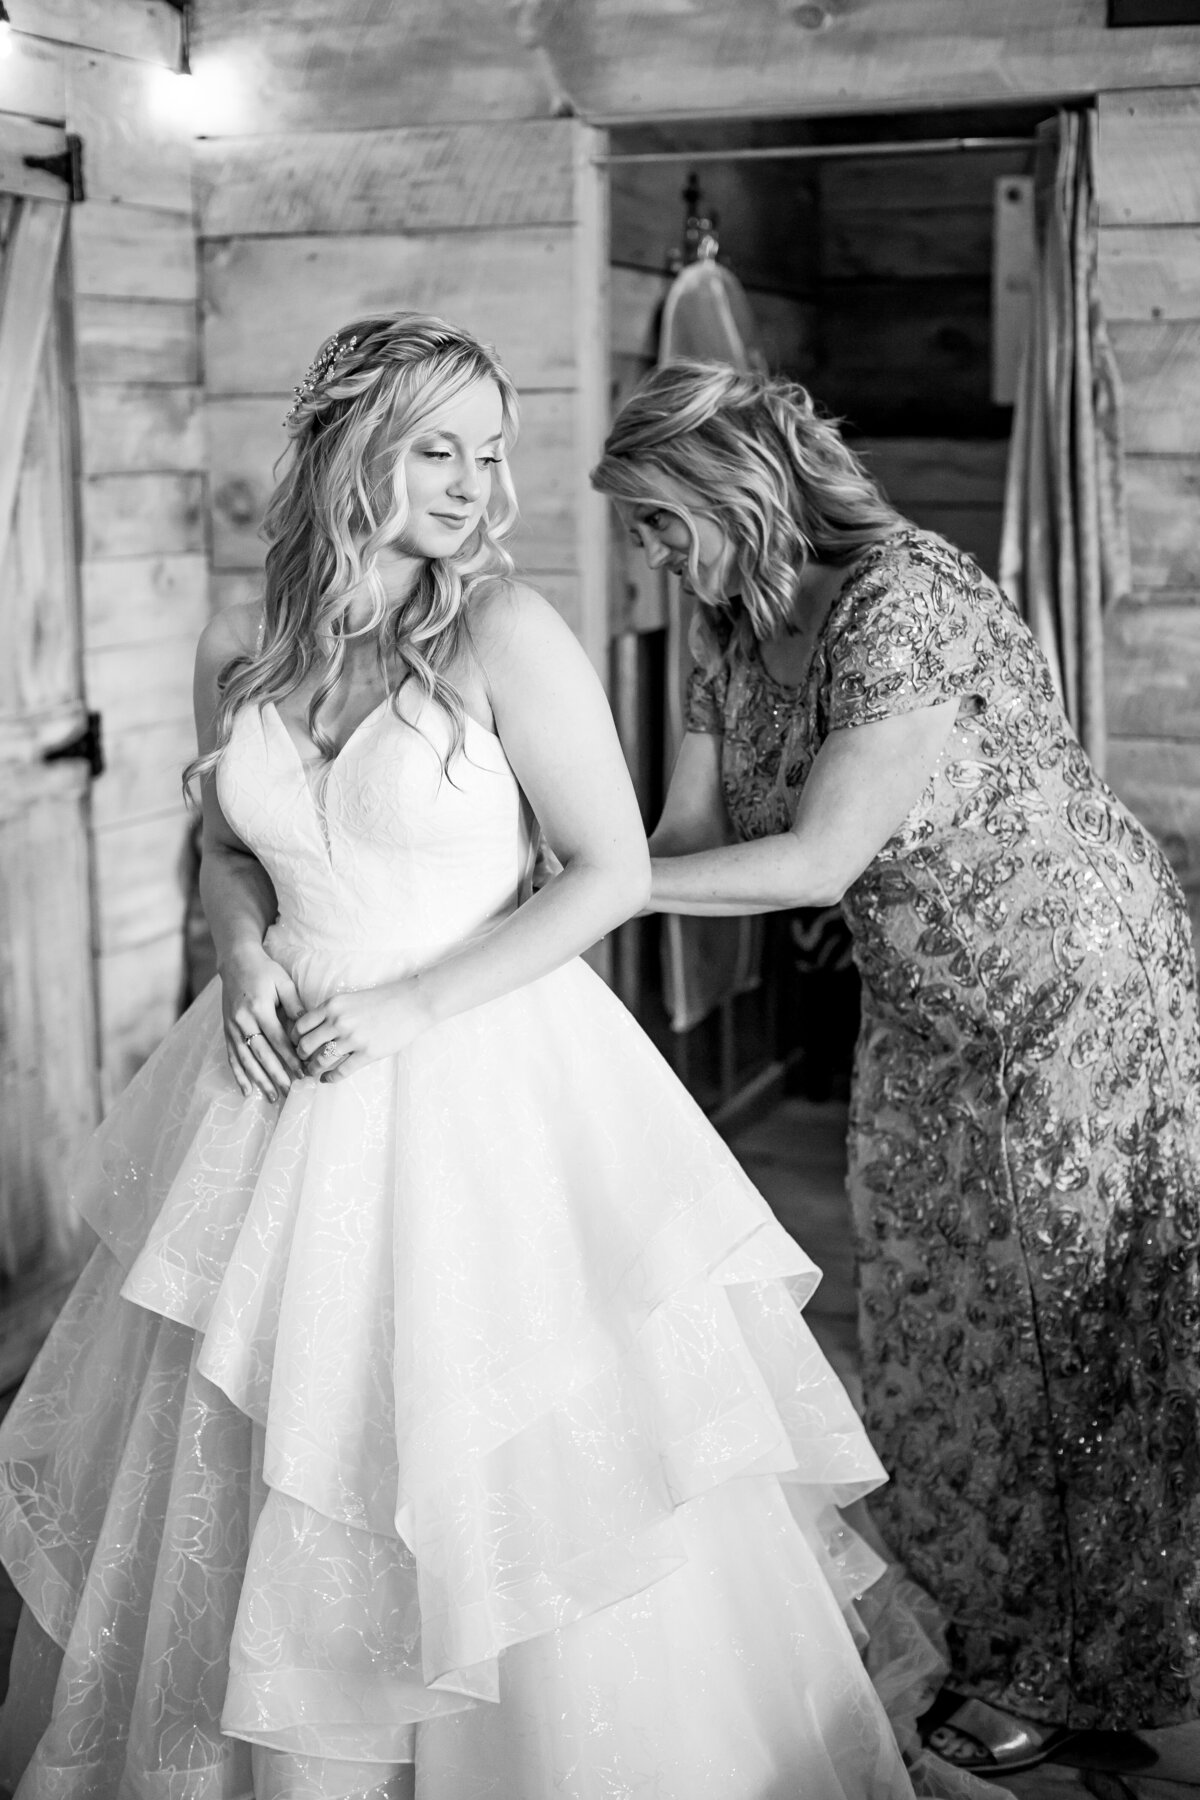 mom buttoning up daughter's wedding dress